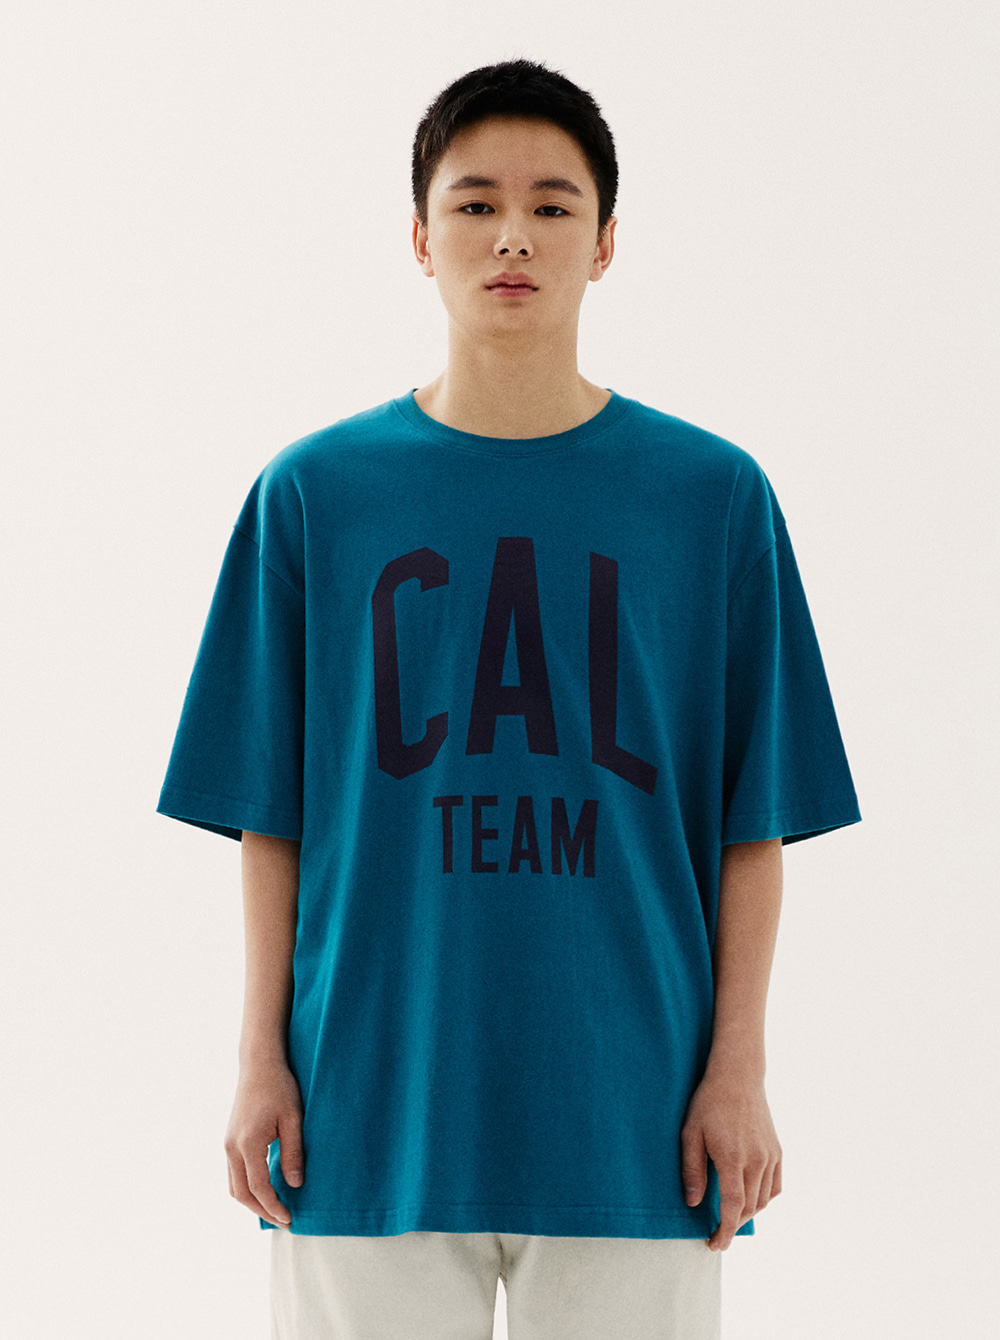 CAL TEAM S/S [TURQUOISE]